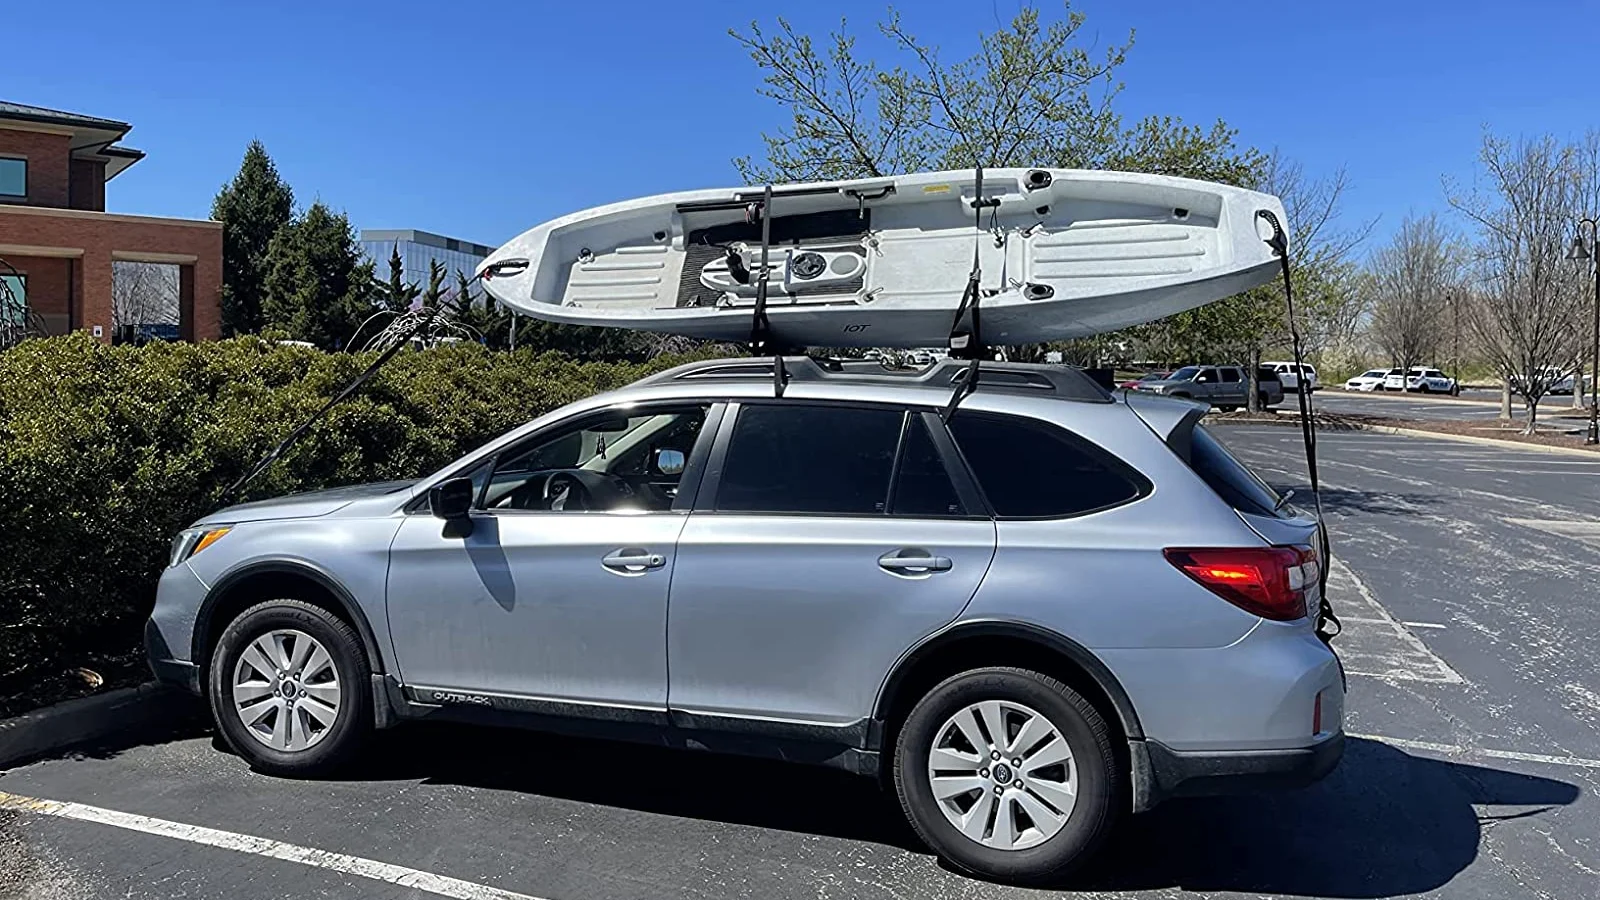 10 Best Kayak Rack For Car Without Roof Rack - RoofBox Hub